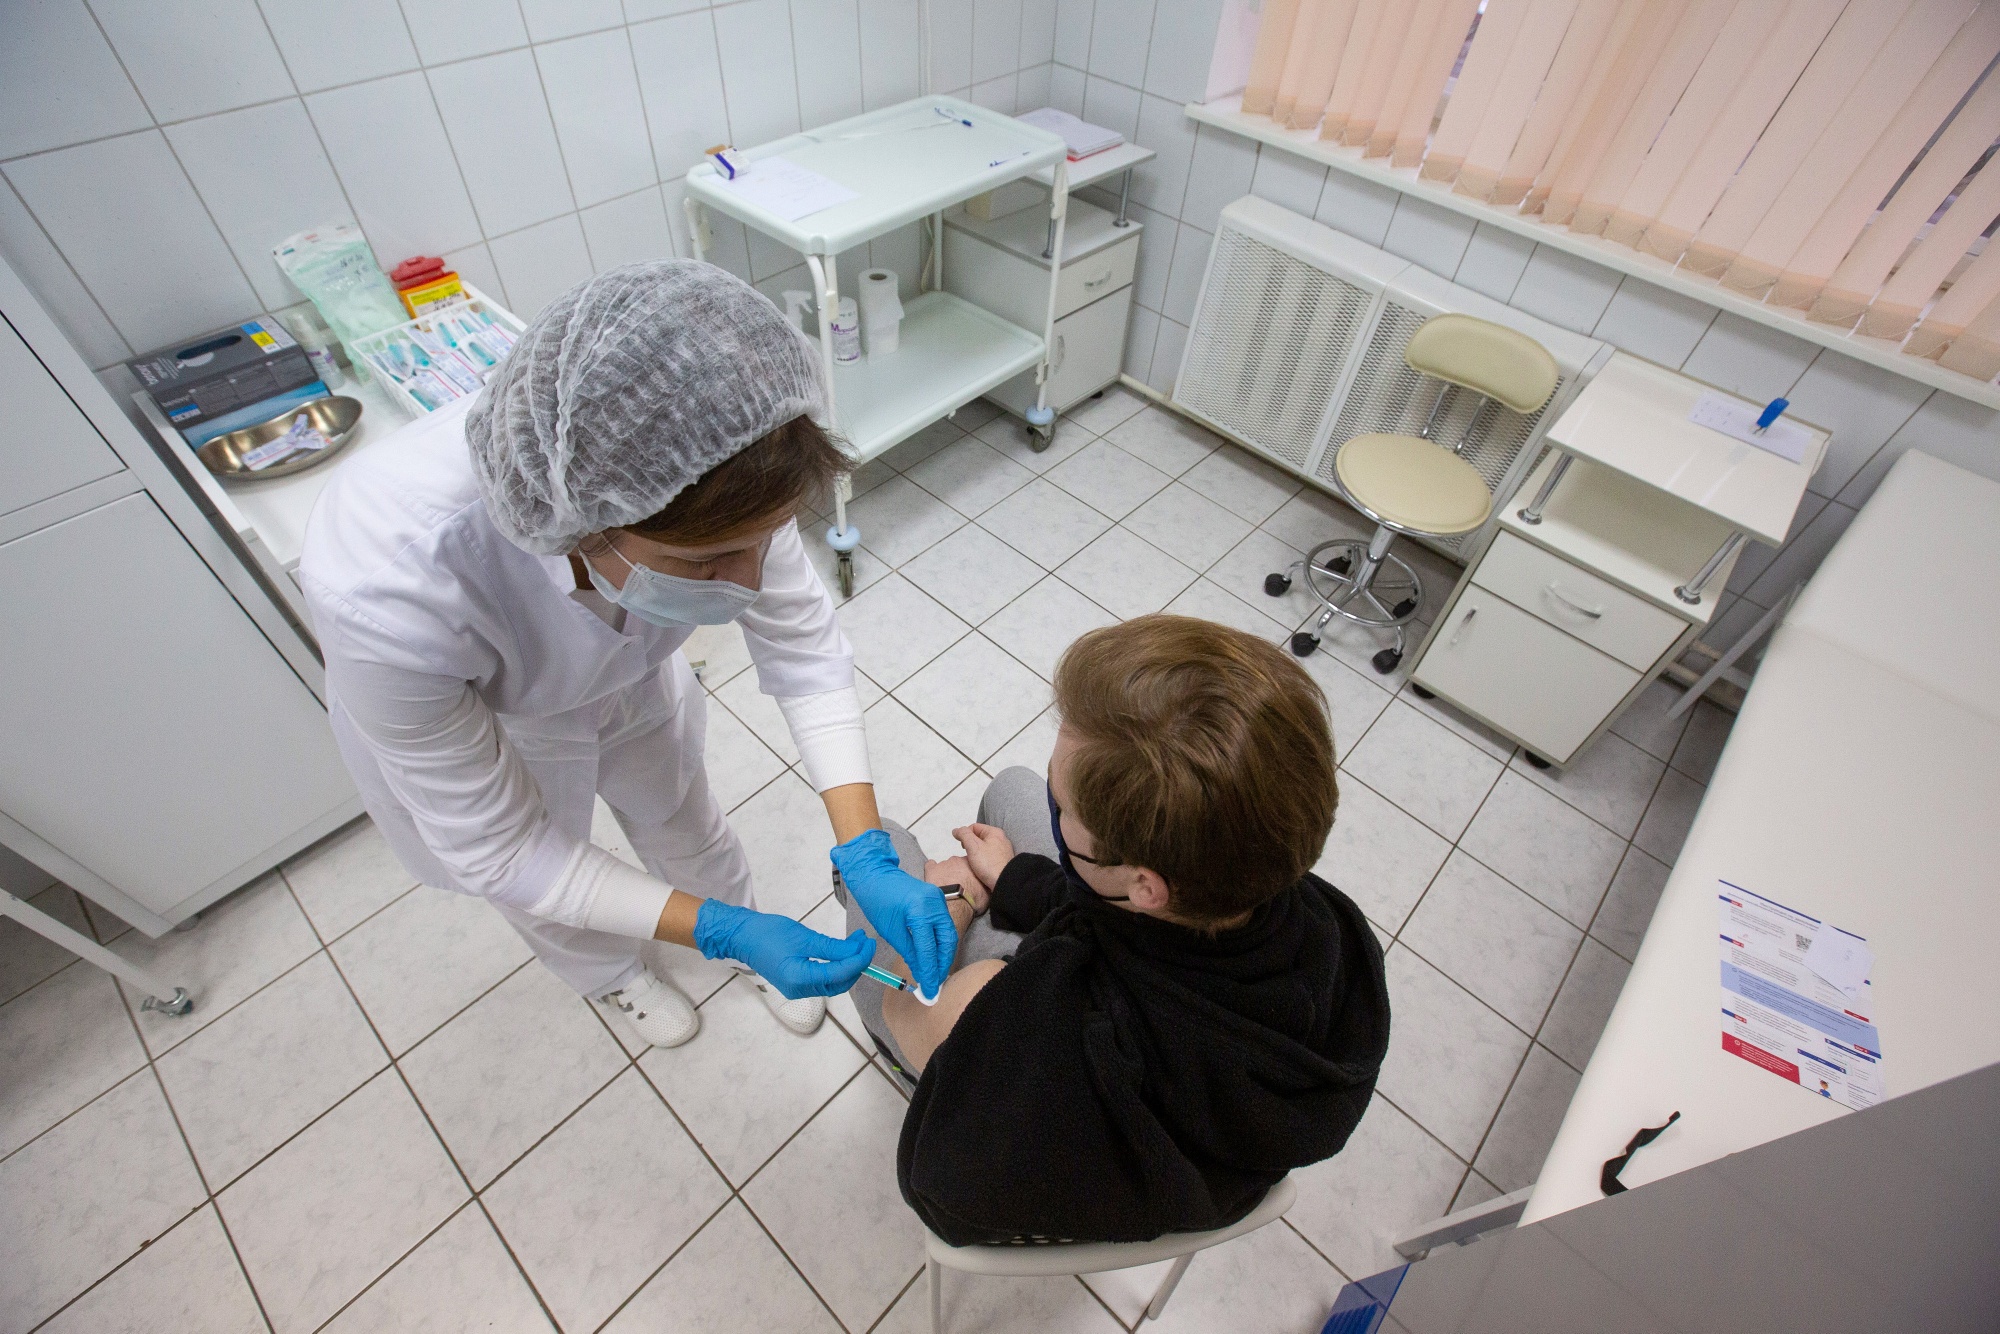 A health worker administers a Sputnik V Covid-19 vaccine shot during trials in Moscow.